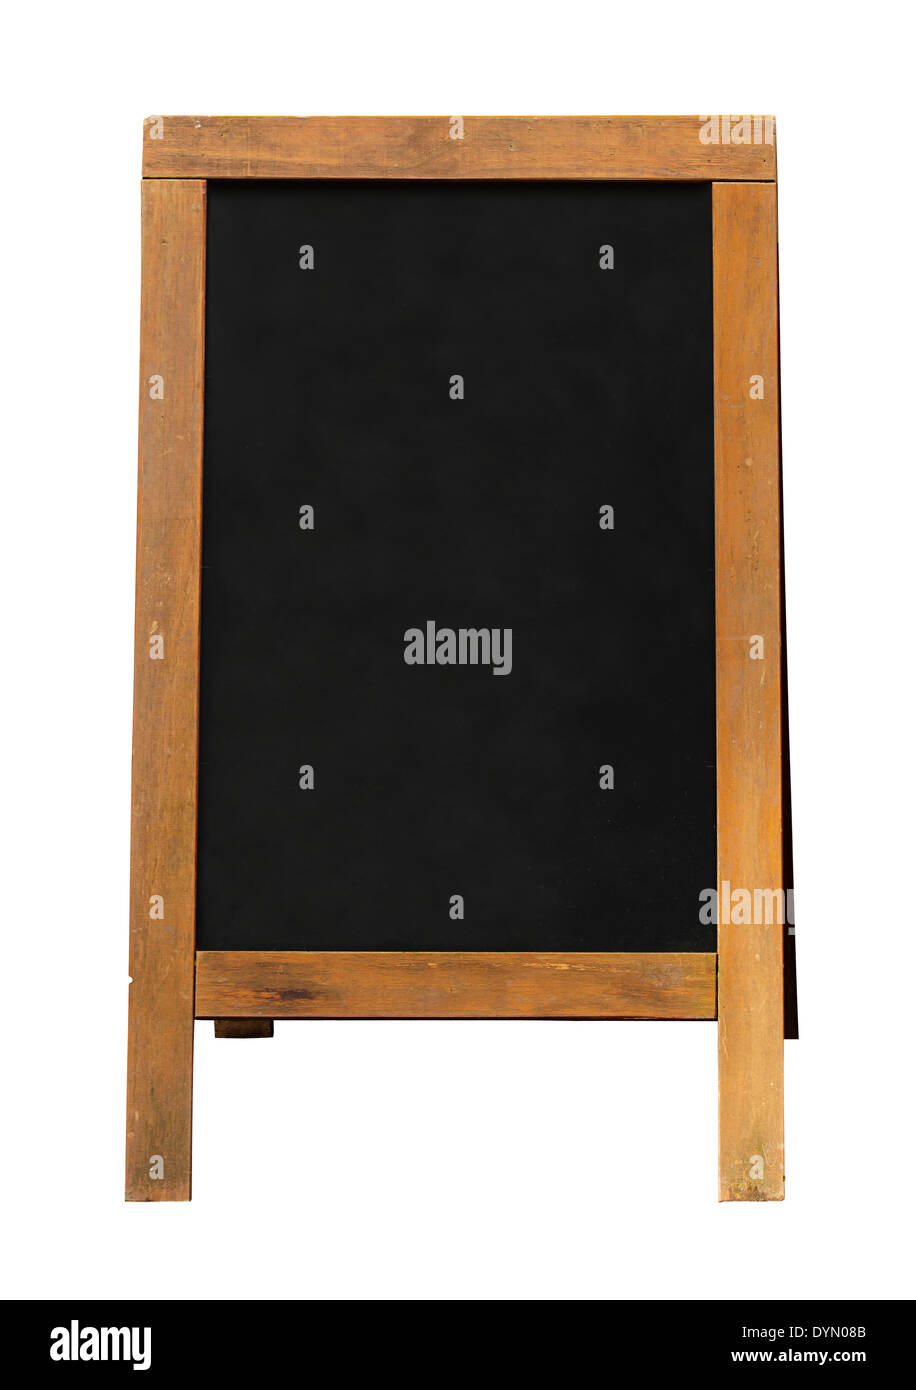 Blackboard A frame sign with wooden frame and blank area for your sales message or offer. Stock Photo